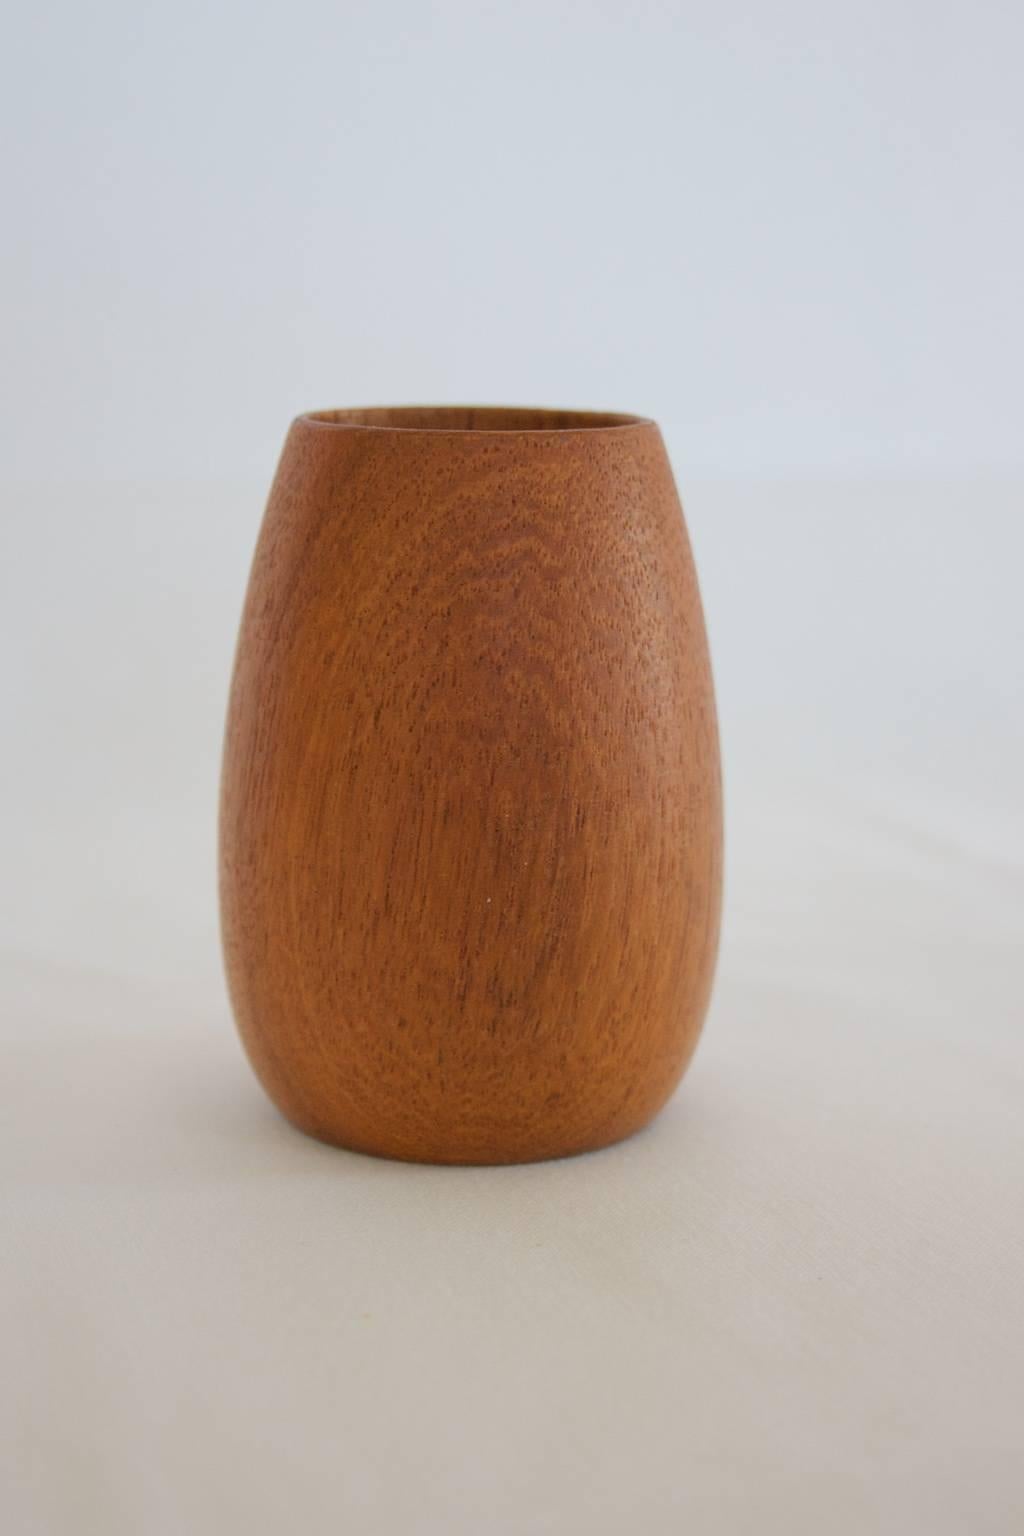 Very Charming Small Rare Teak Bowl Design by Karl Holmberg In Good Condition For Sale In Malmo, SE